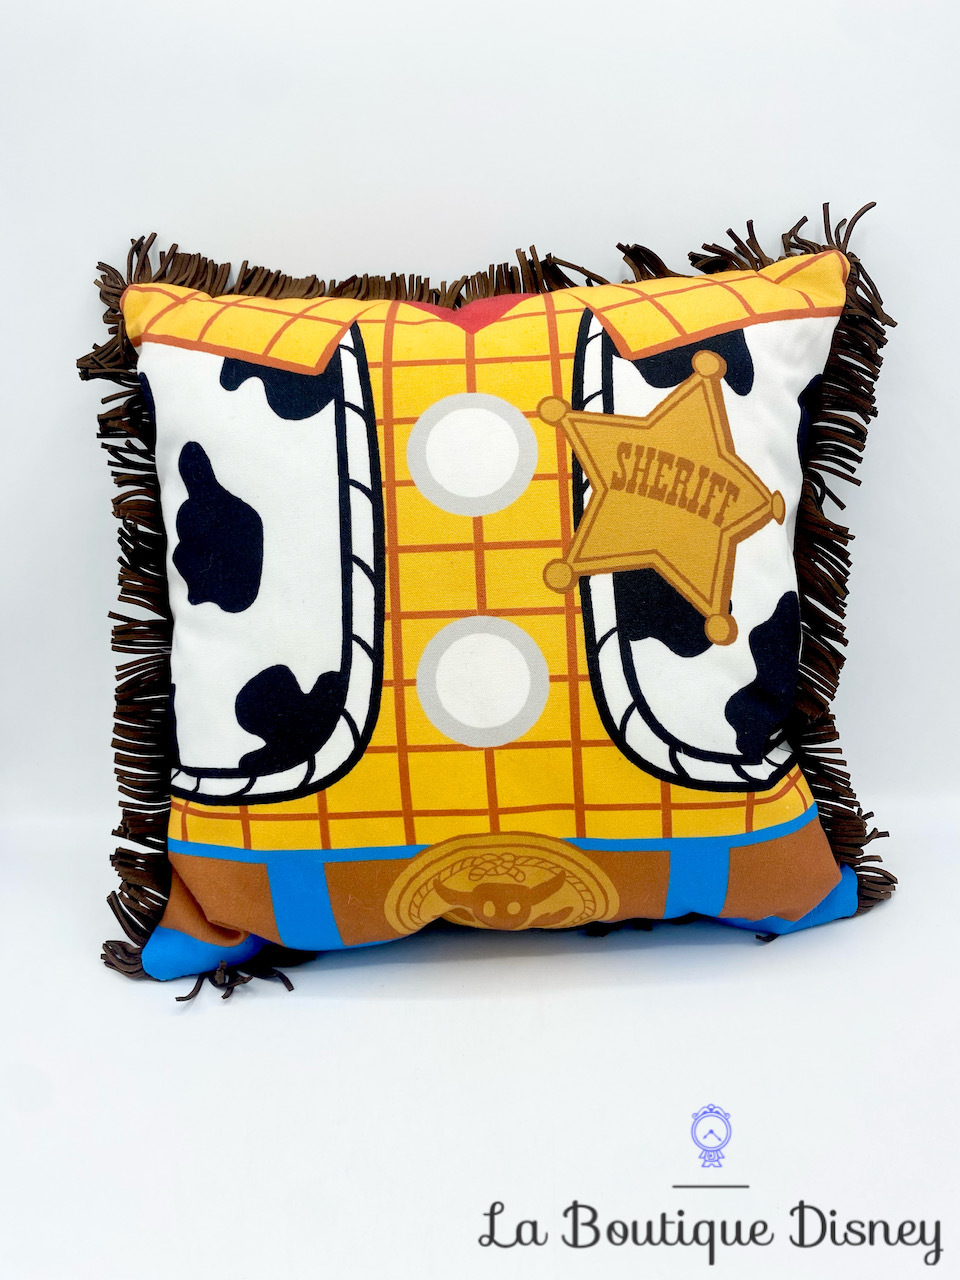 Coussin Woody Toy Story Disney Primark oreiller cowboy